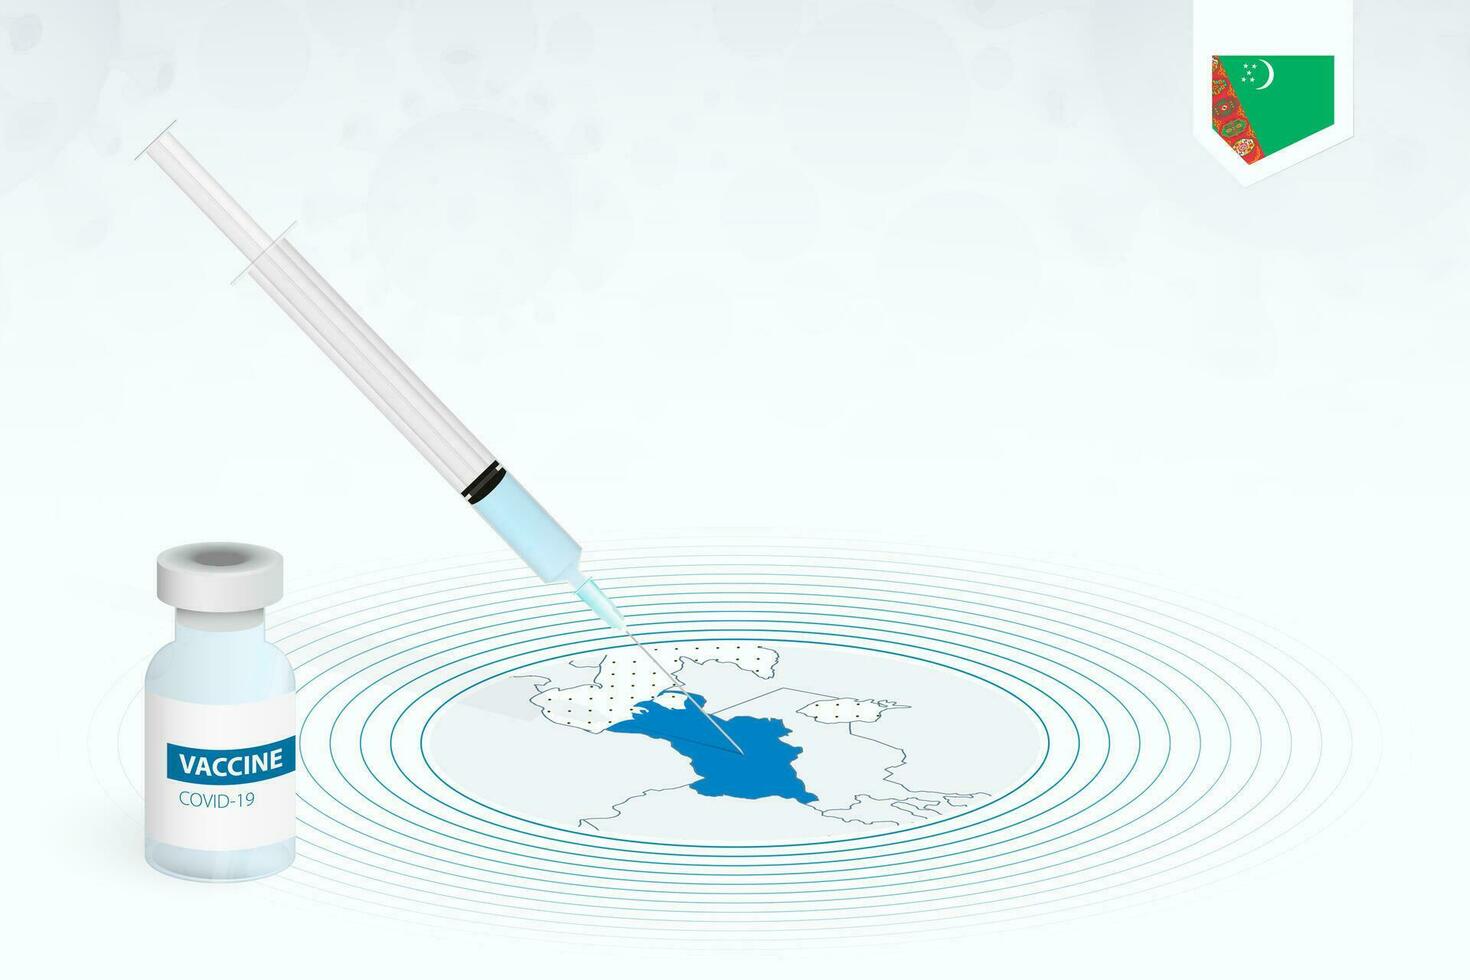 COVID-19 vaccination in Turkmenistan, coronavirus vaccination illustration with vaccine bottle and syringe injection in map of Turkmenistan. vector